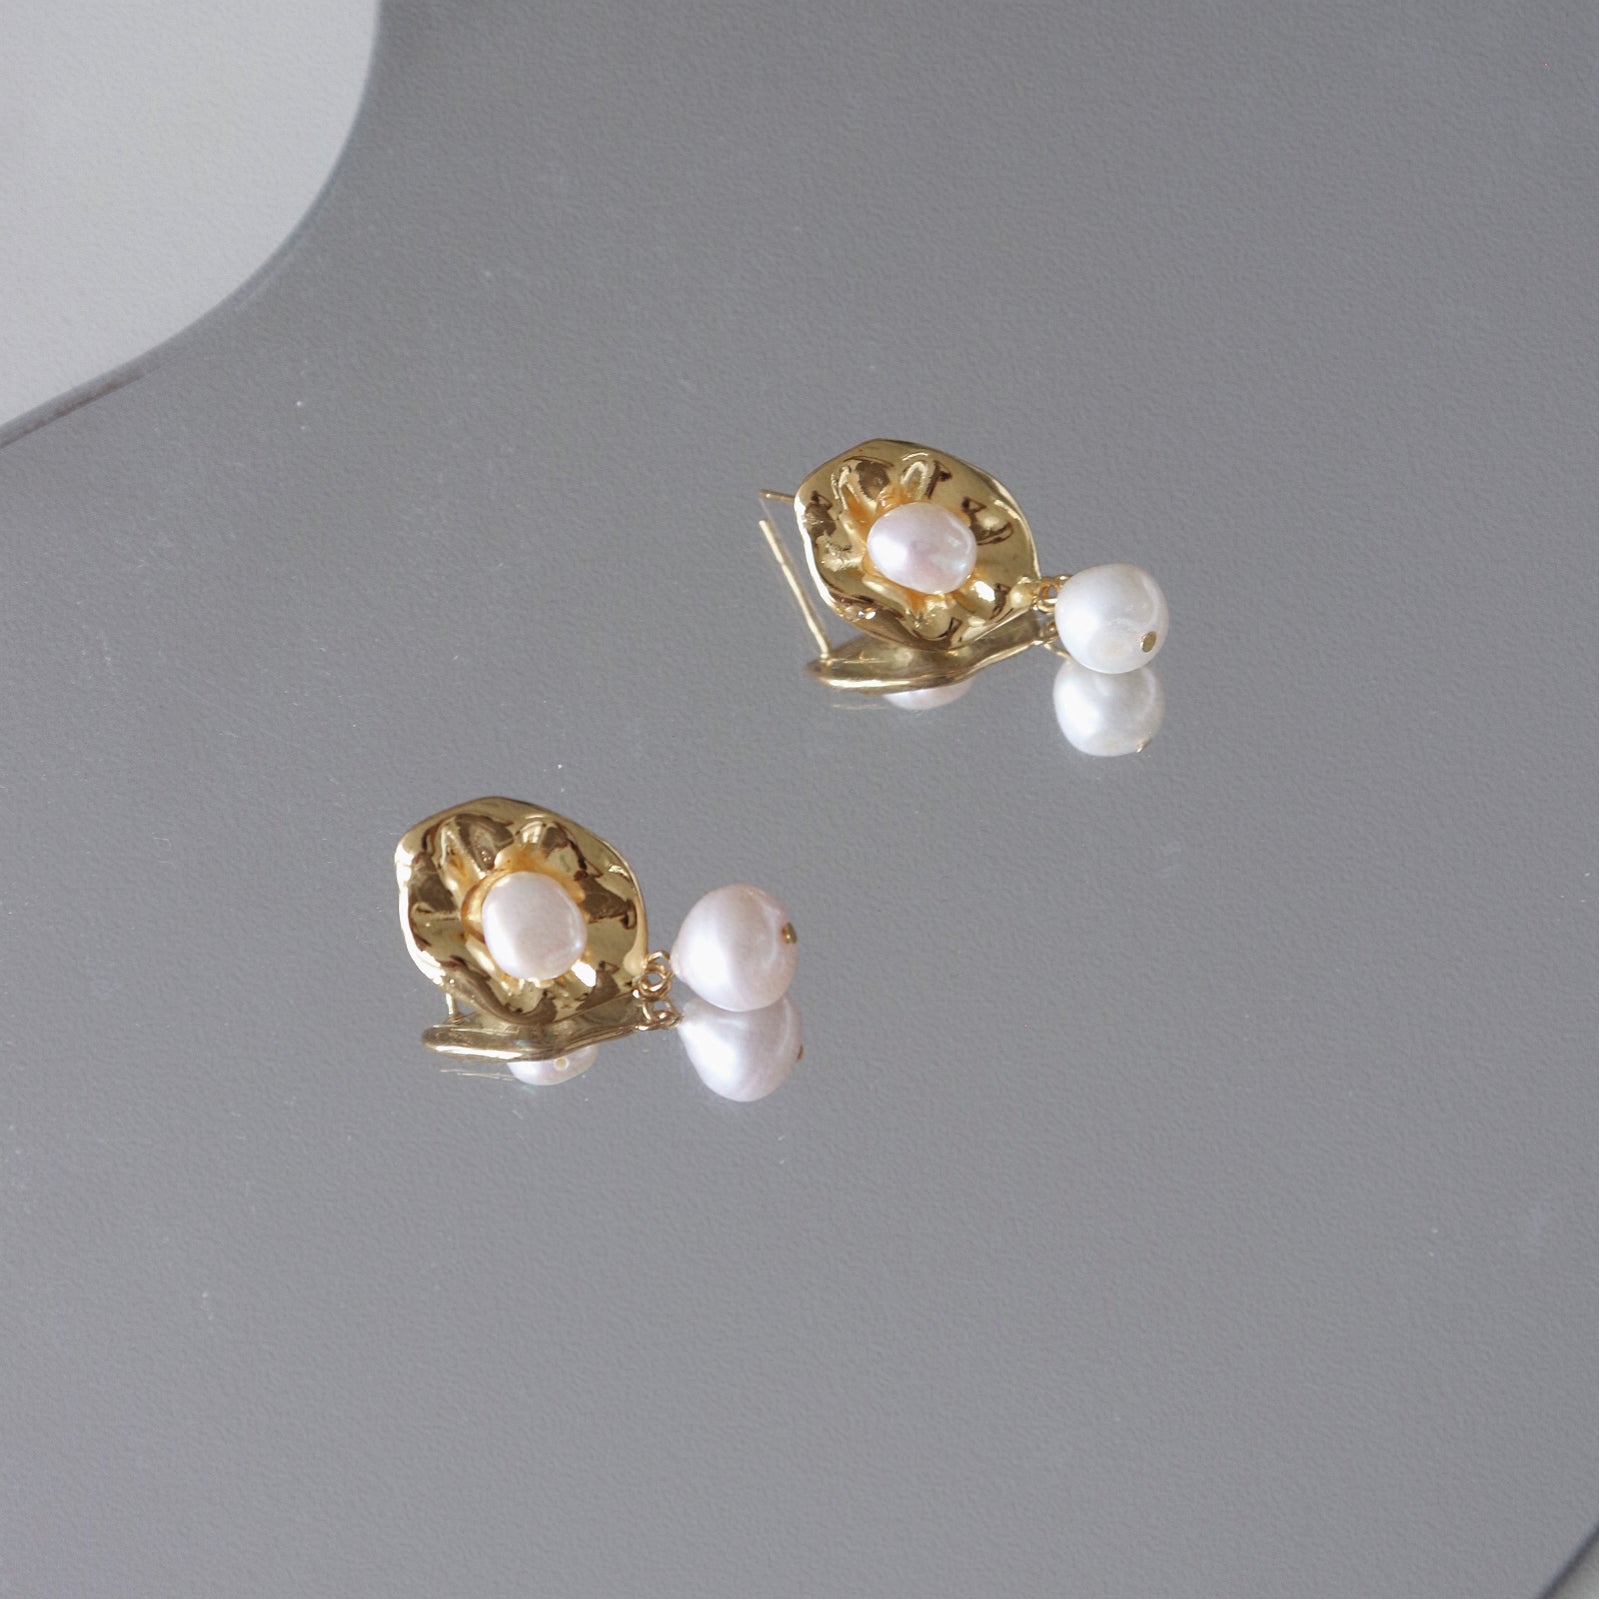 Ximena earrings, Exquisite Shell Pearl earring- timeless simplicity